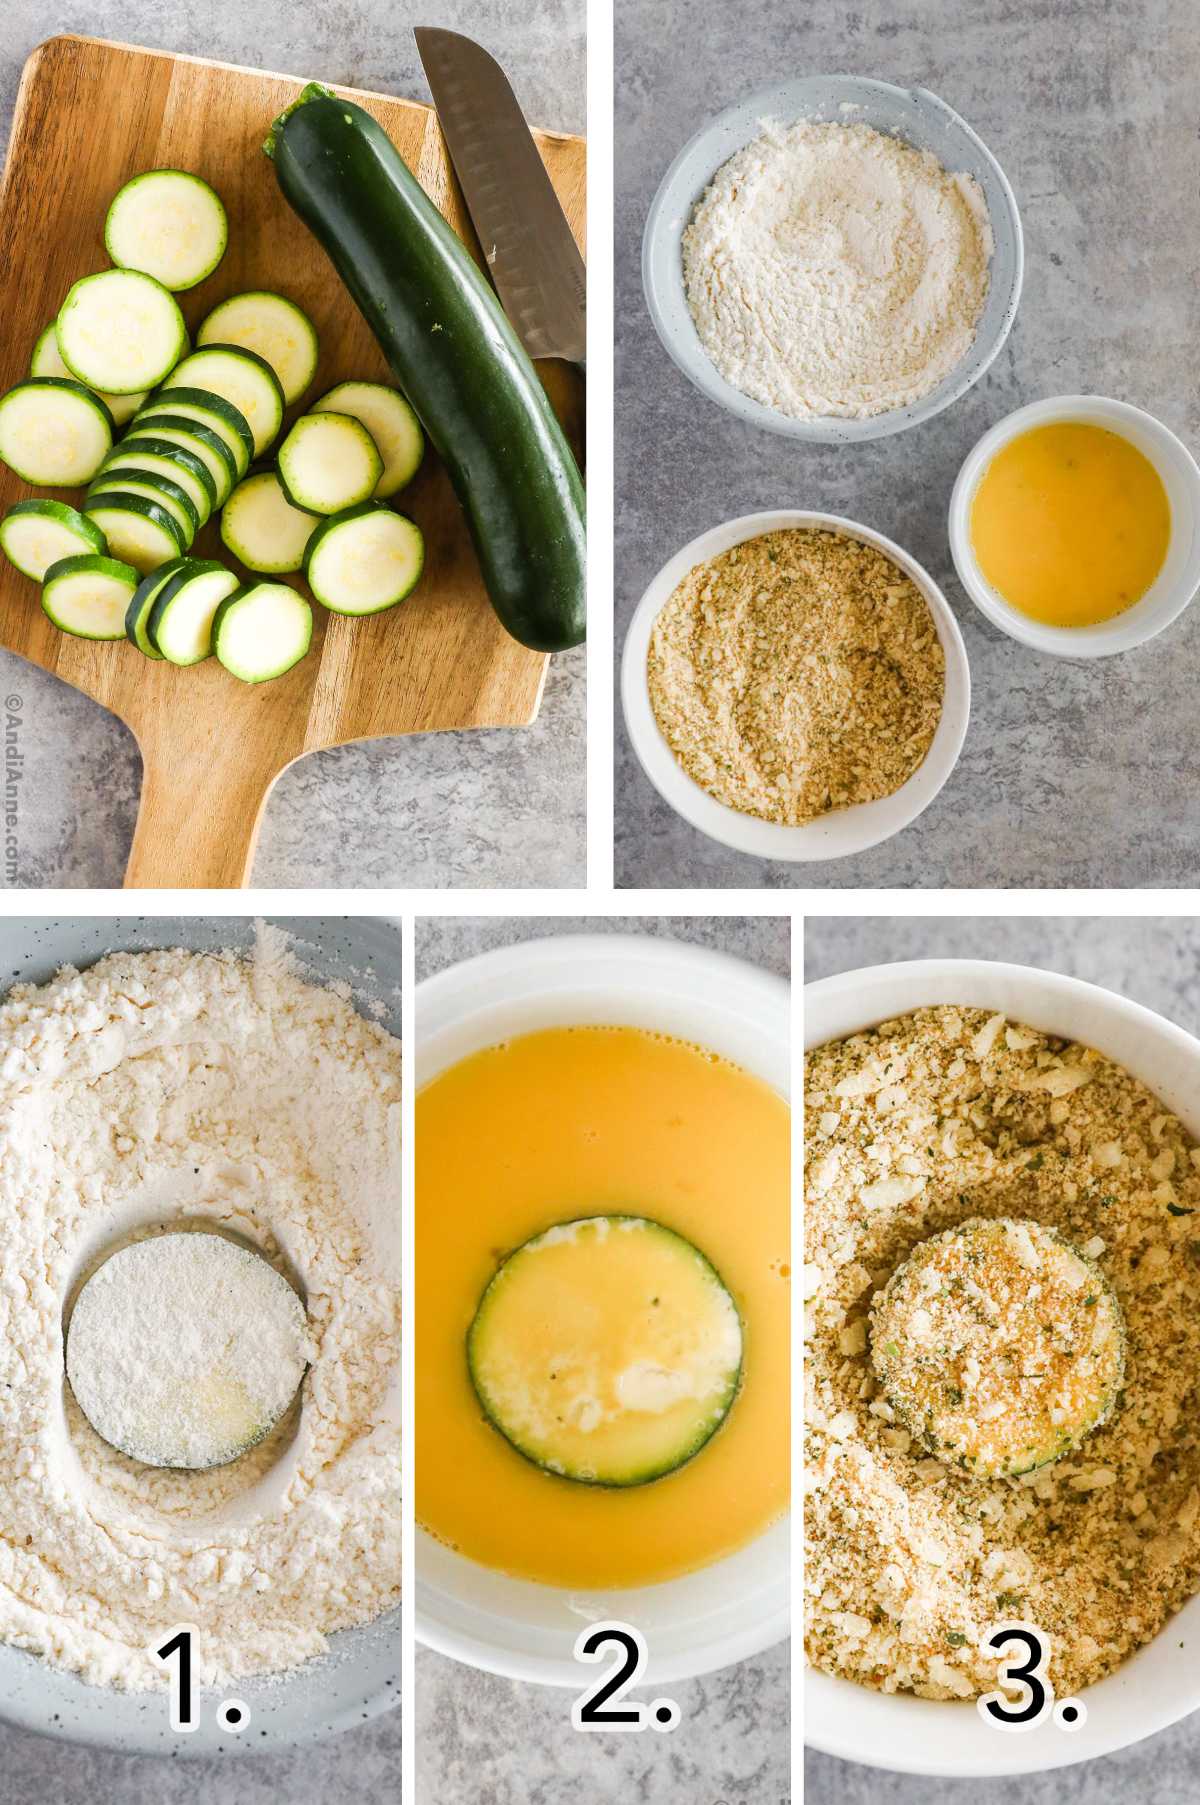 Five overhead images in one: 1. Zucchini slices, one whole zucchini and a knife sitting on a wooden cutting board. 2. Egg mixture, flavored bread crumbs and flour mixture all sit in individual white bowls. 3. Zucchini slice in flower bowl. 4. Zucchini slice in egg bowl. 5. Zucchini slice in bread crumb bowl. 